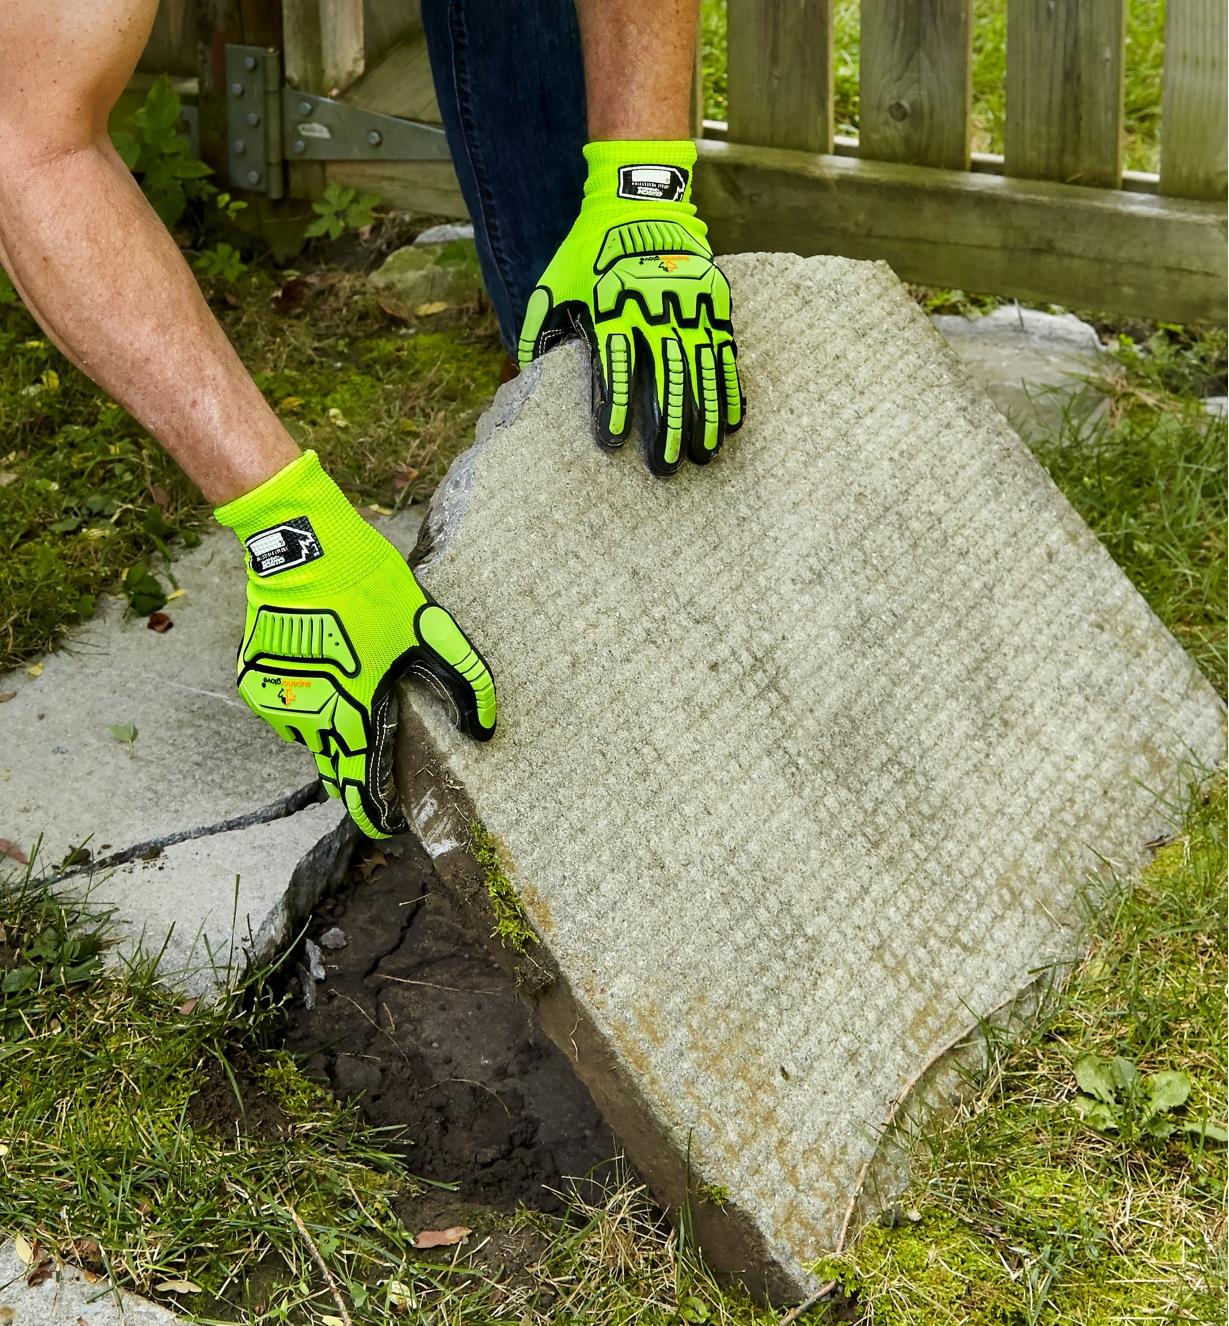 A landscaper wears impact-resistant gloves while removing an old, cracked patio stone